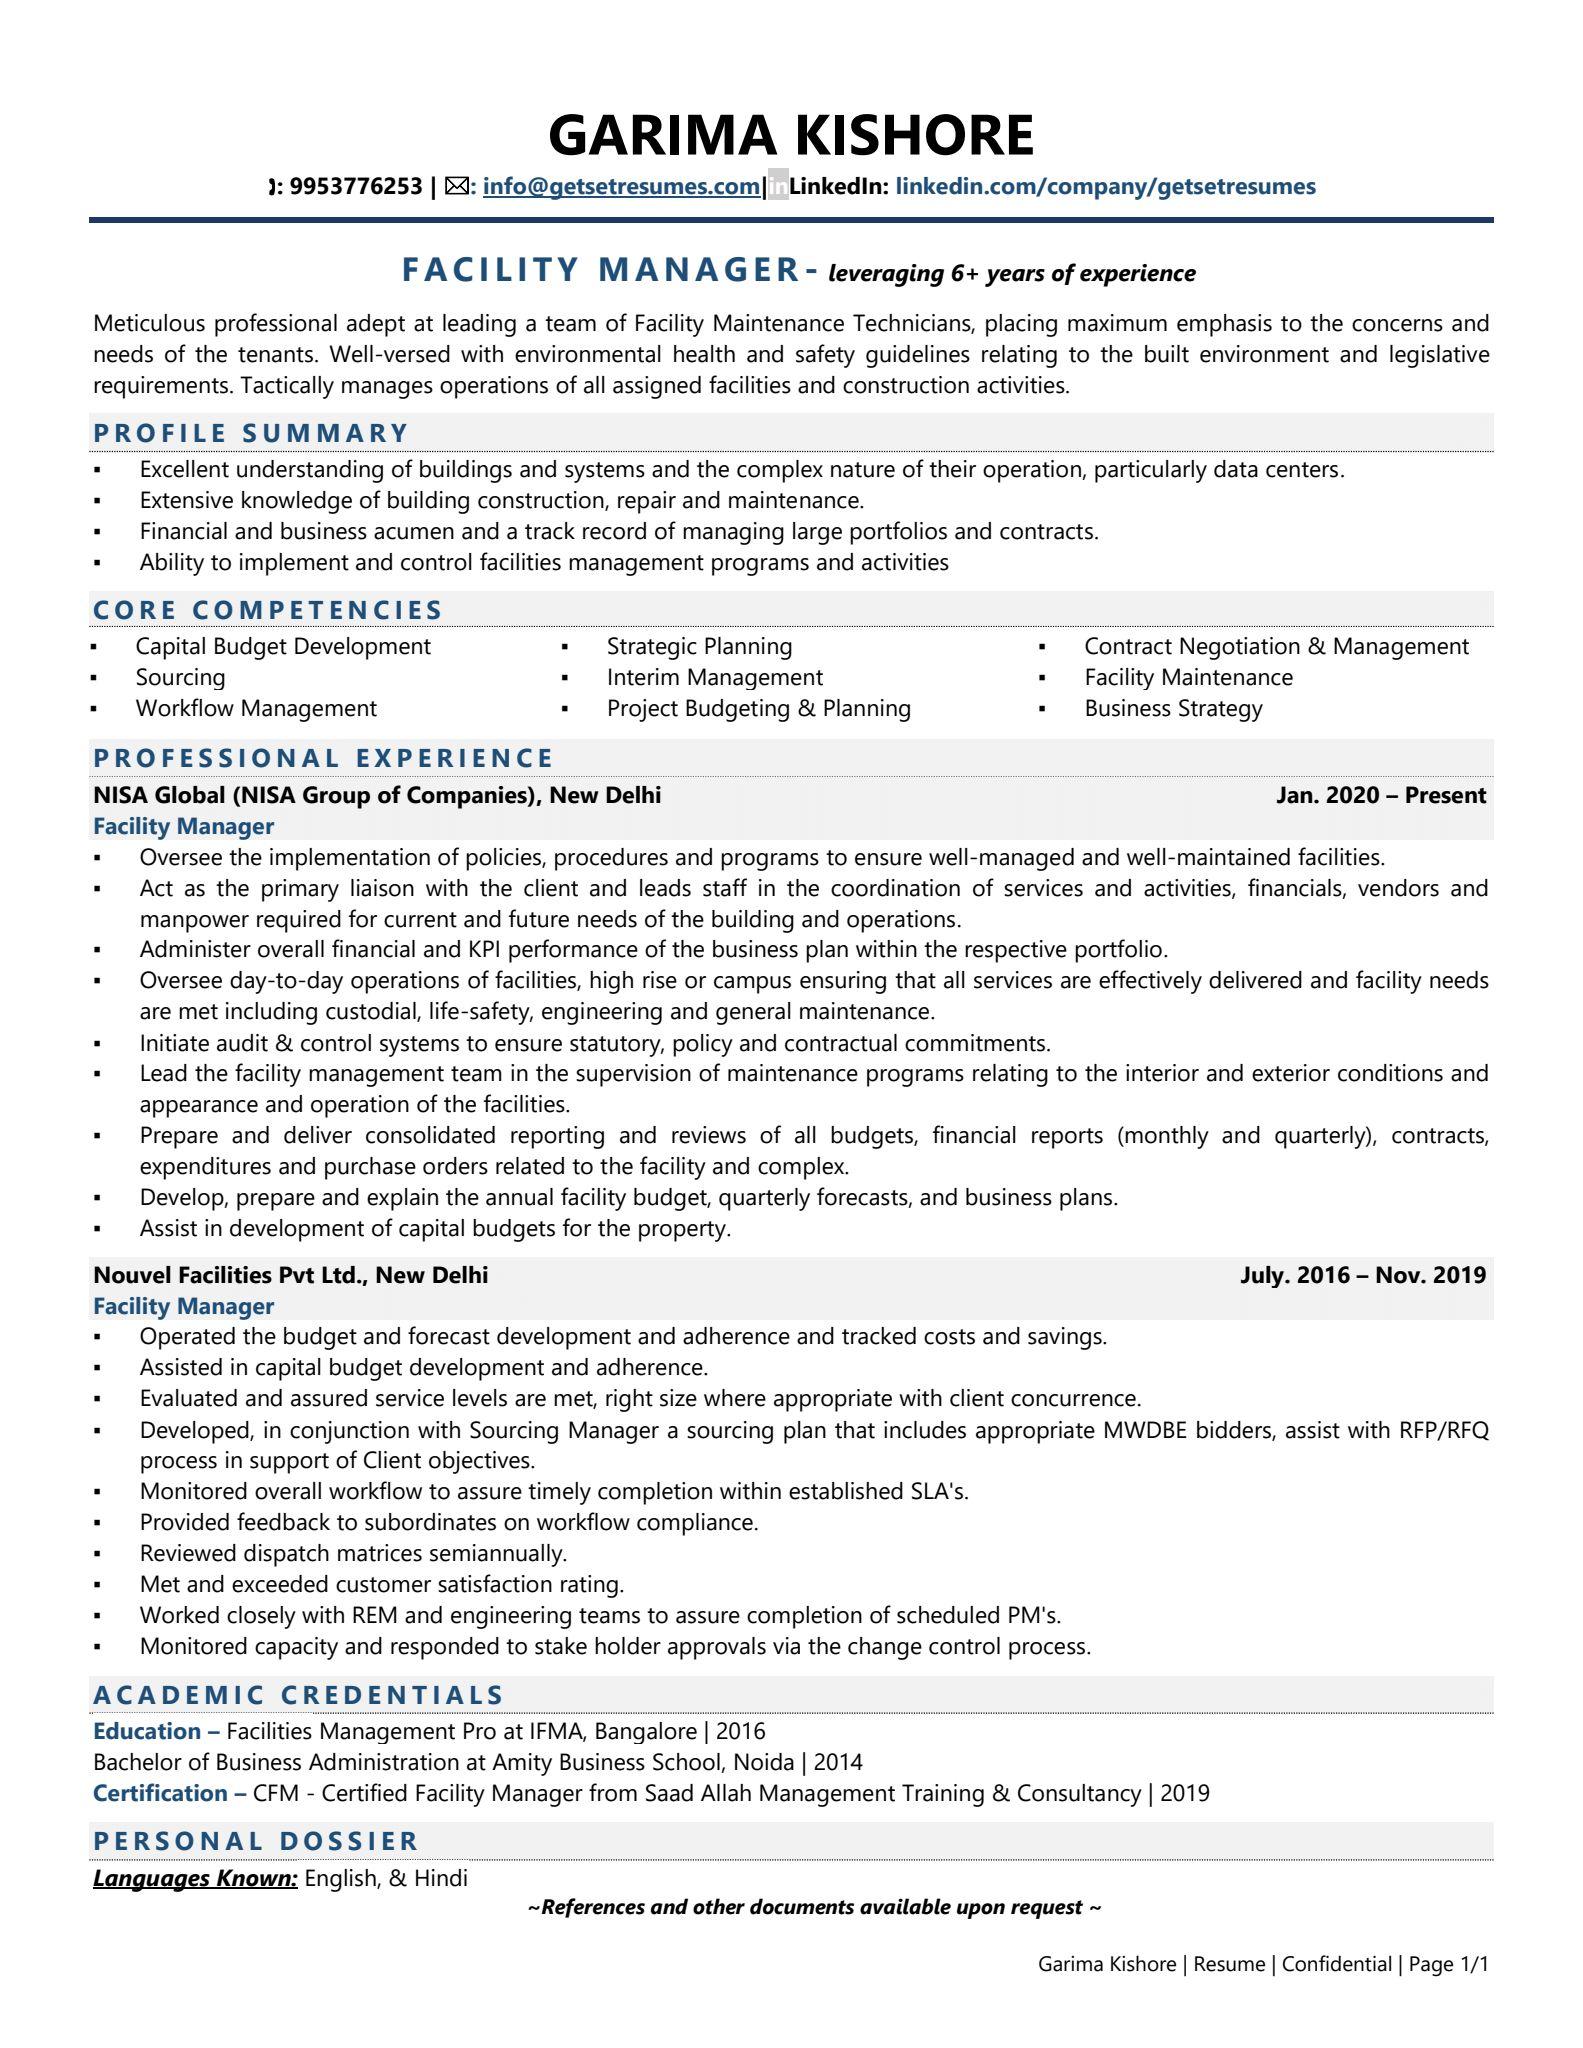 resume sample for facility manager